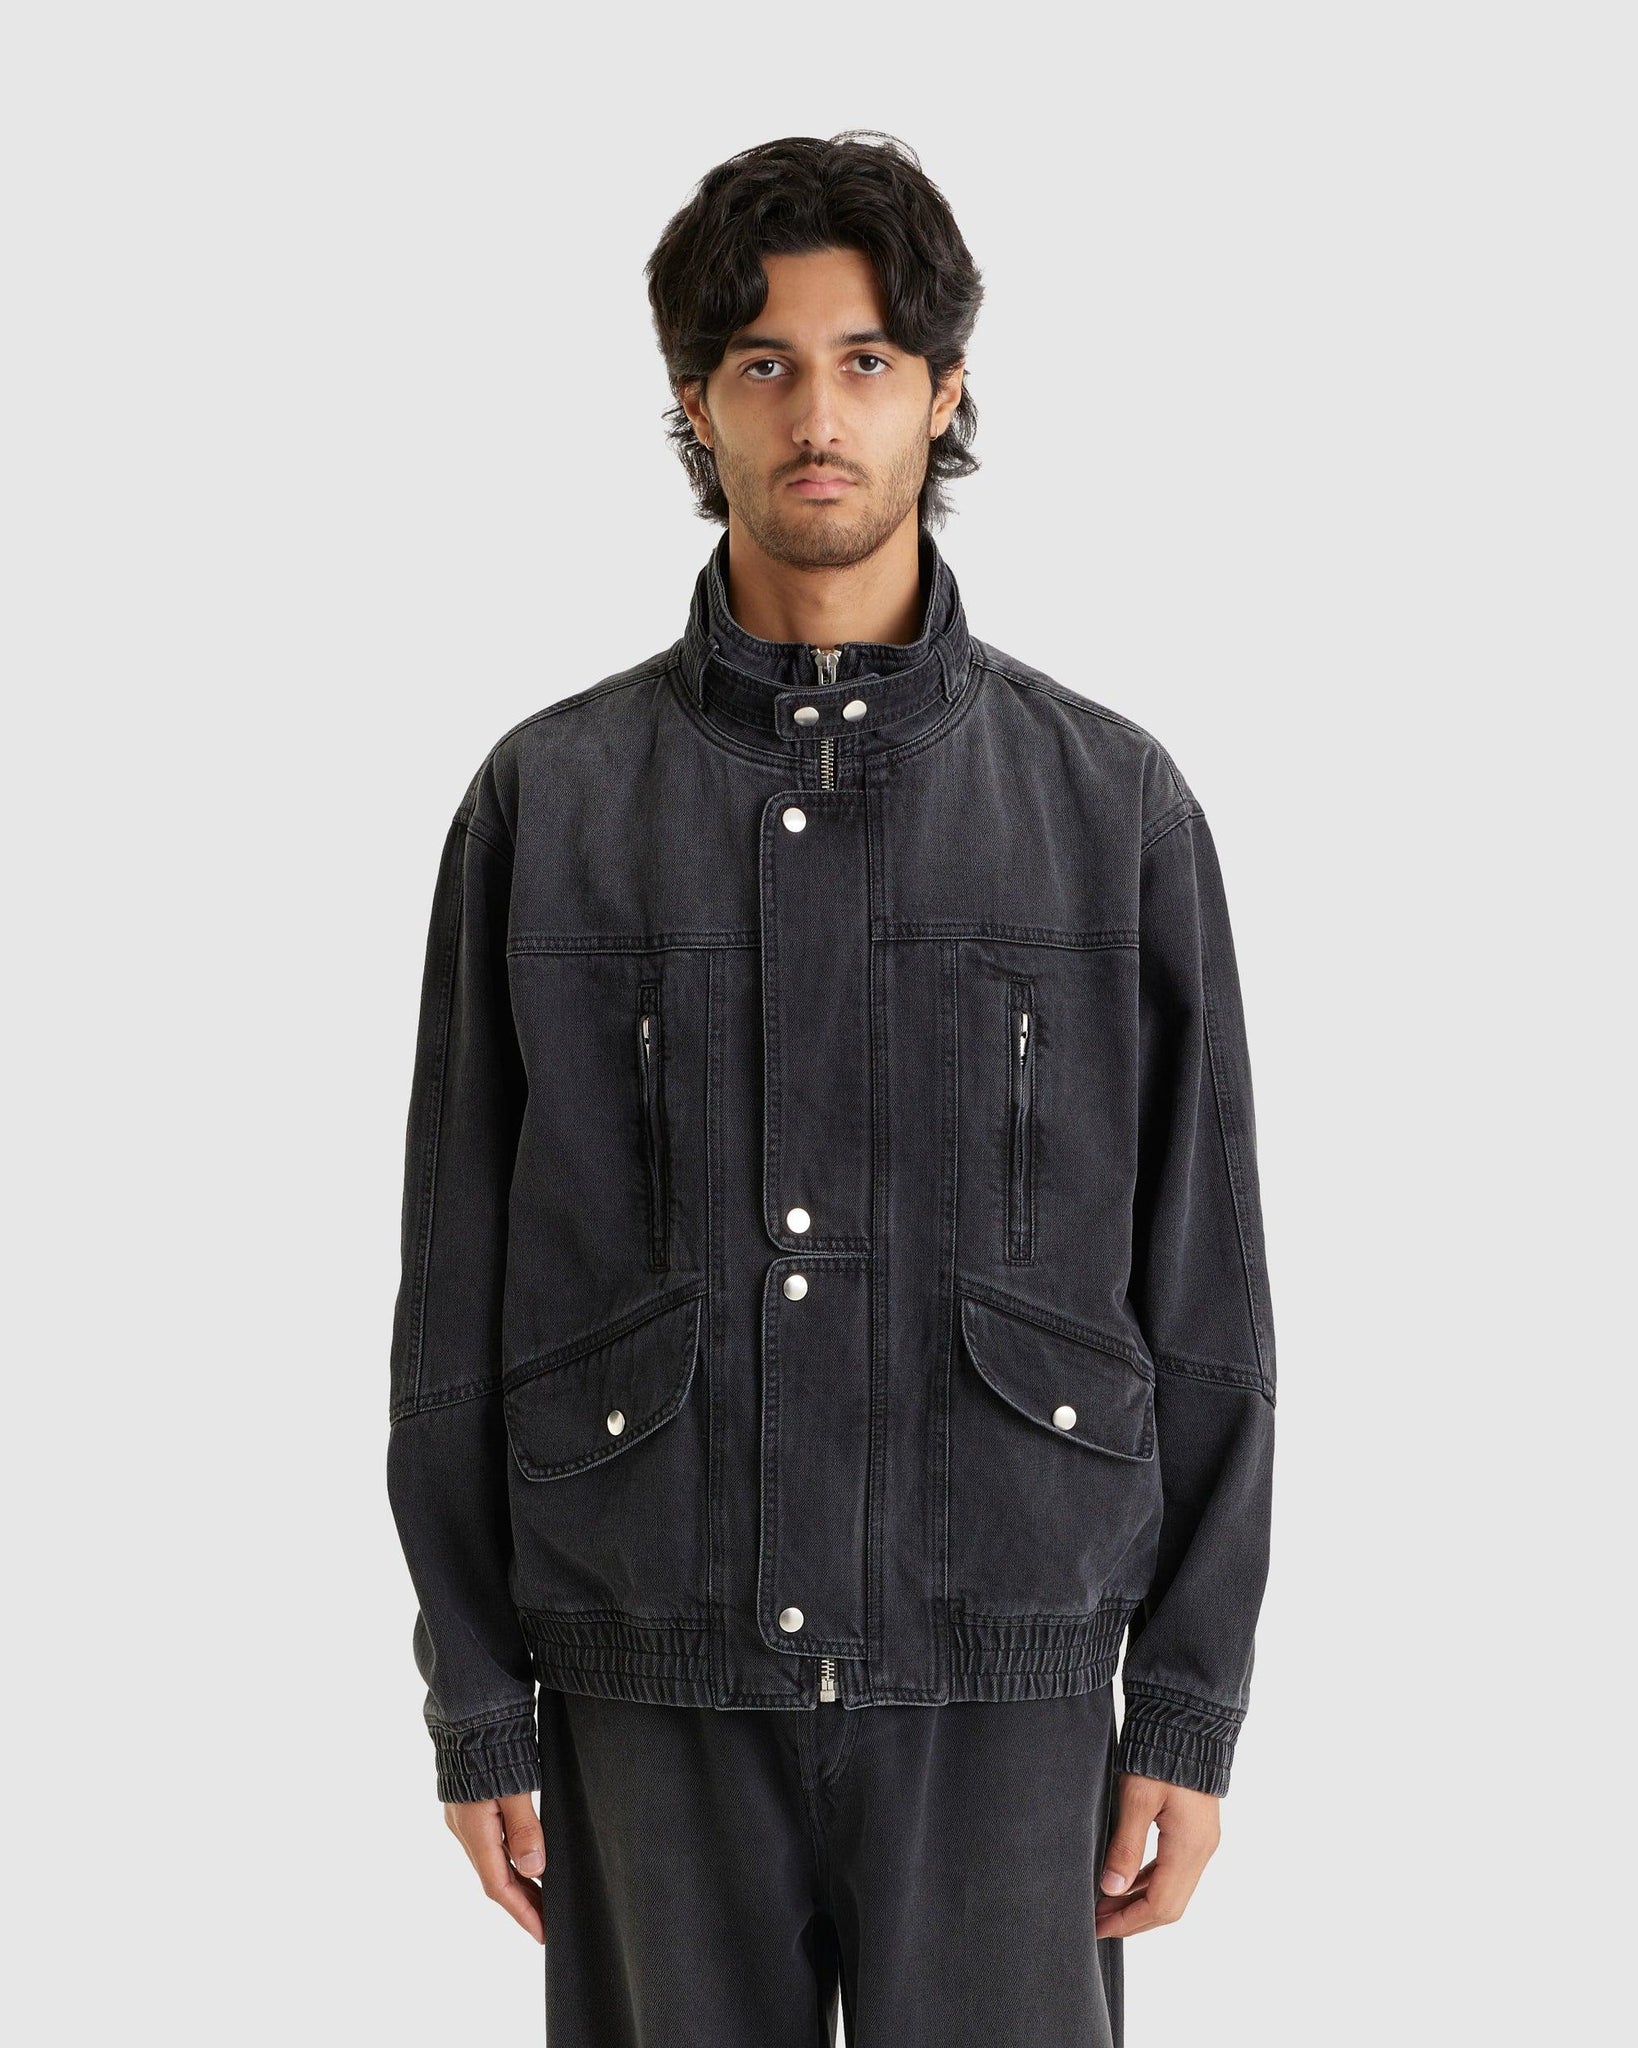 Jakito Jacket - {{ collection.title }} - Chinatown Country Club 